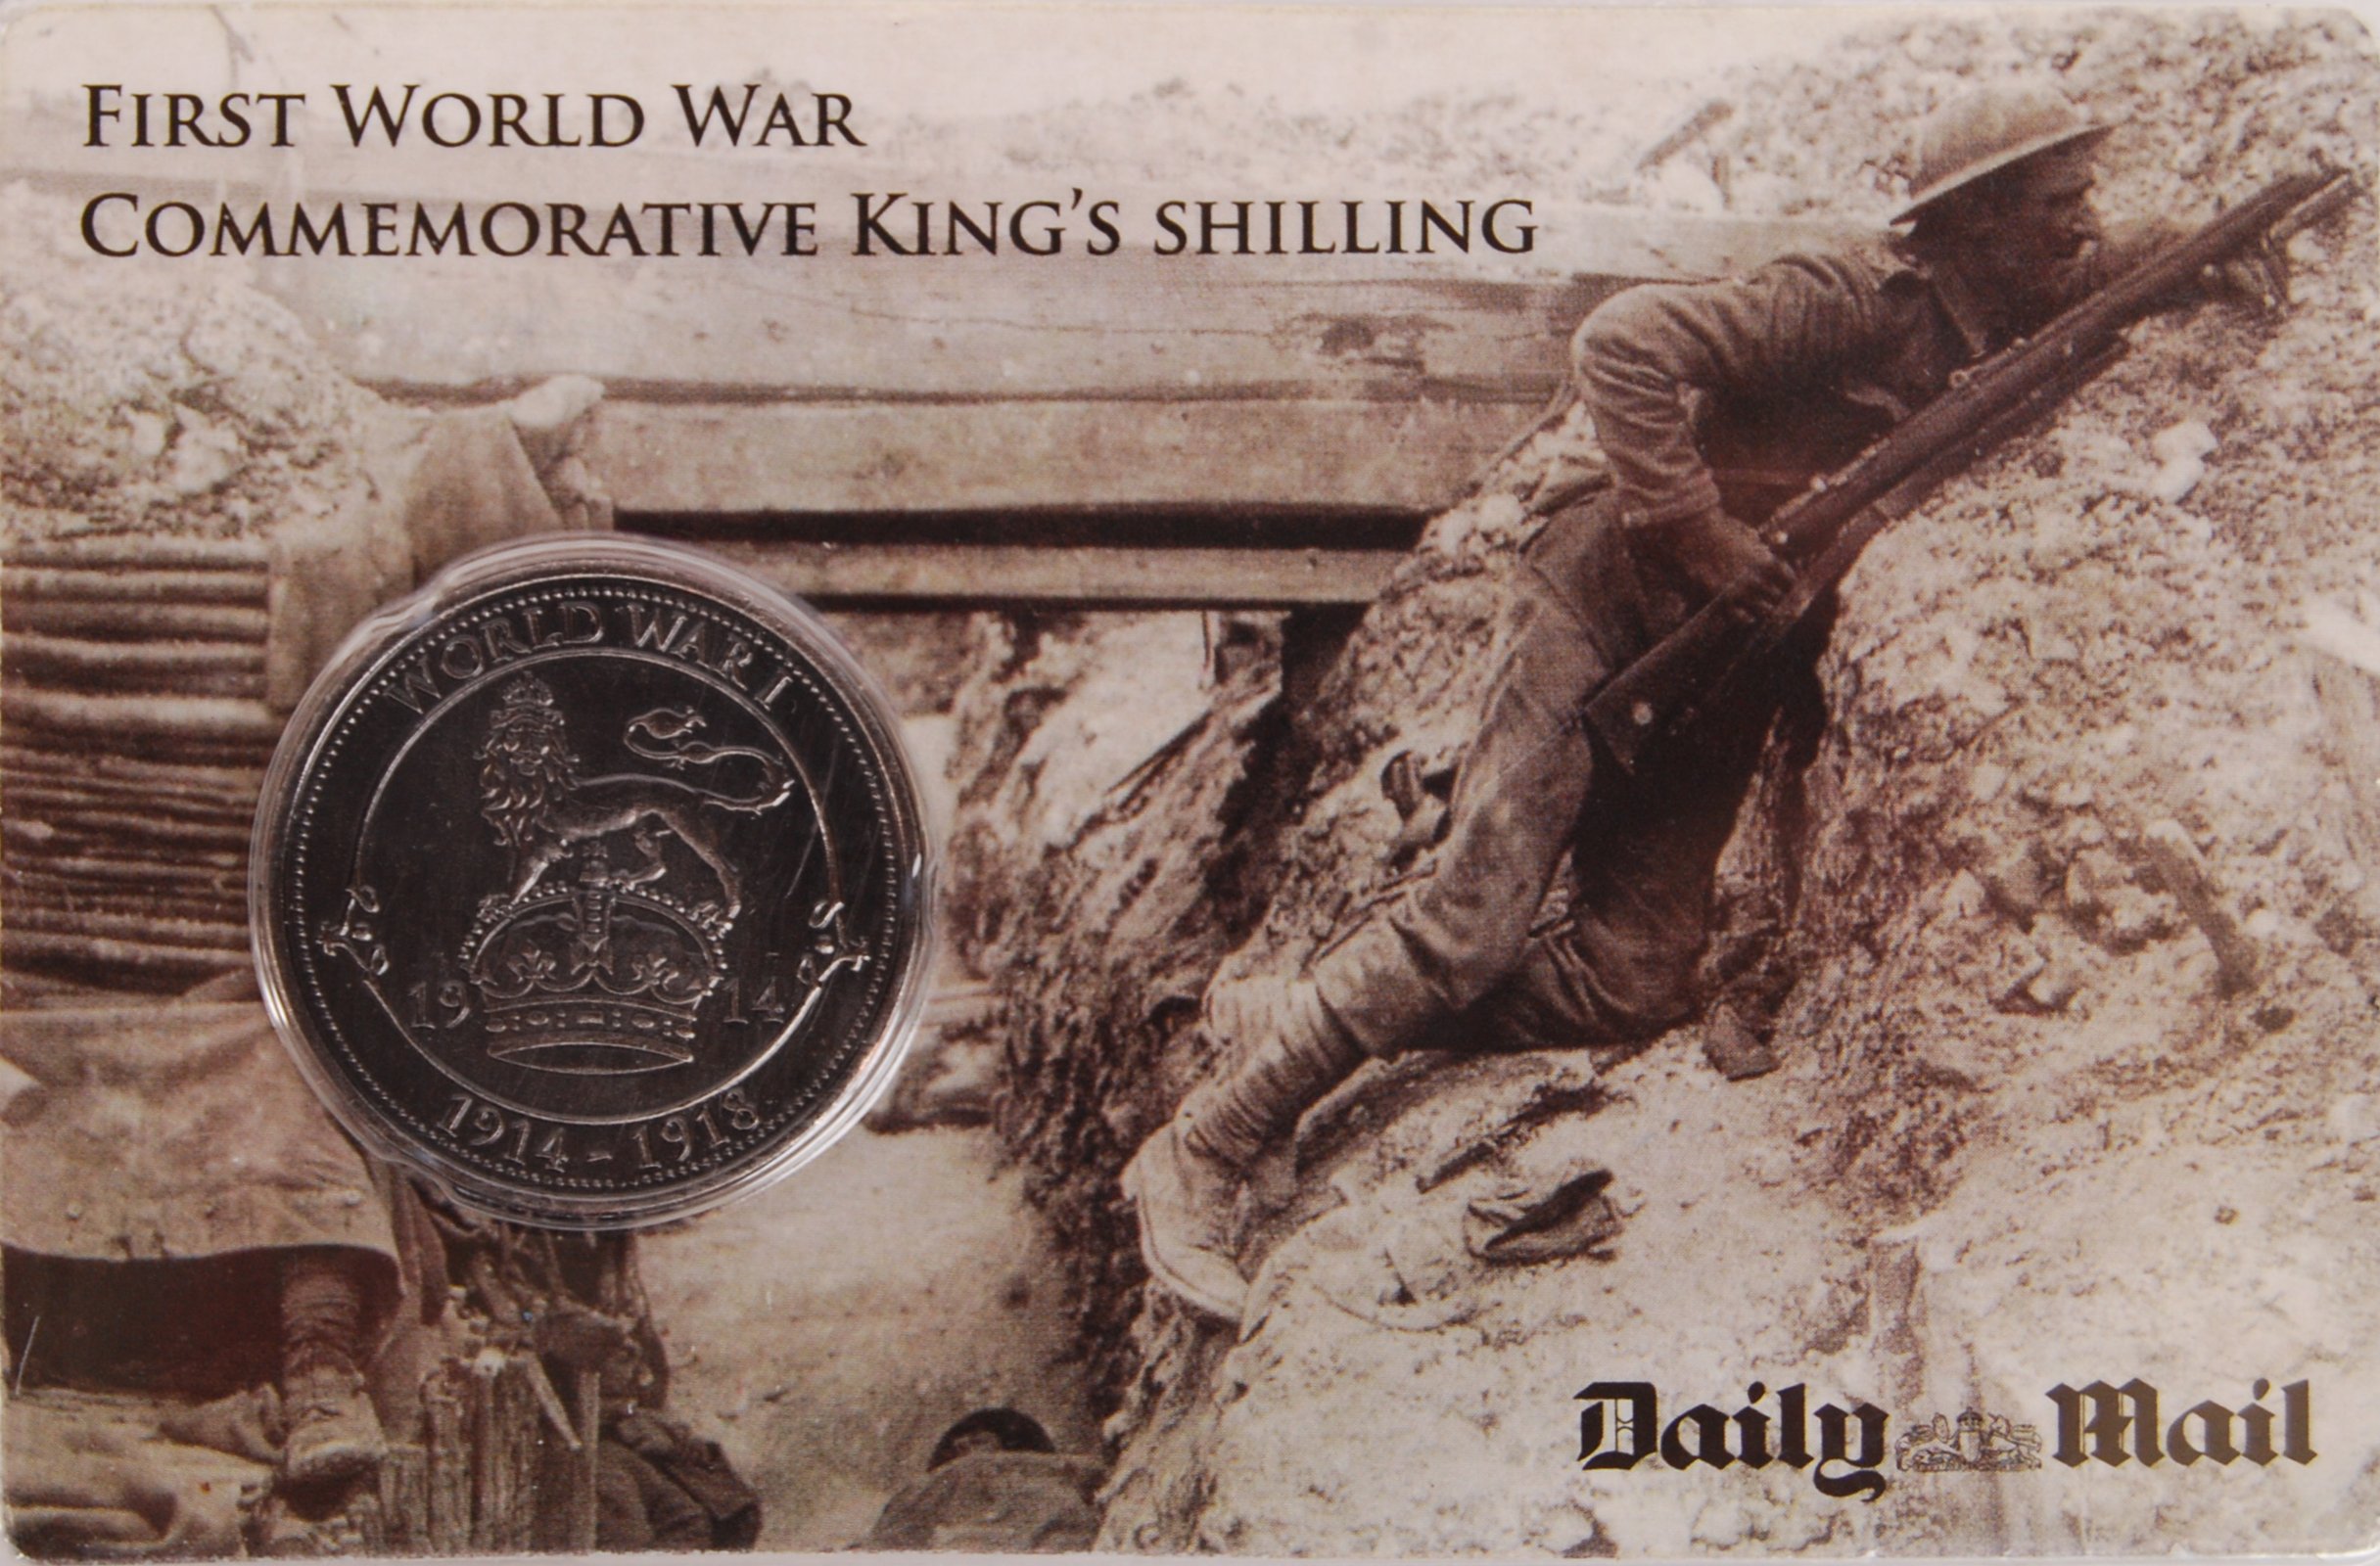 WWI FIRST WORLD WAR COMMEMORATIVE KING'S SHILLING COINS - Image 3 of 4